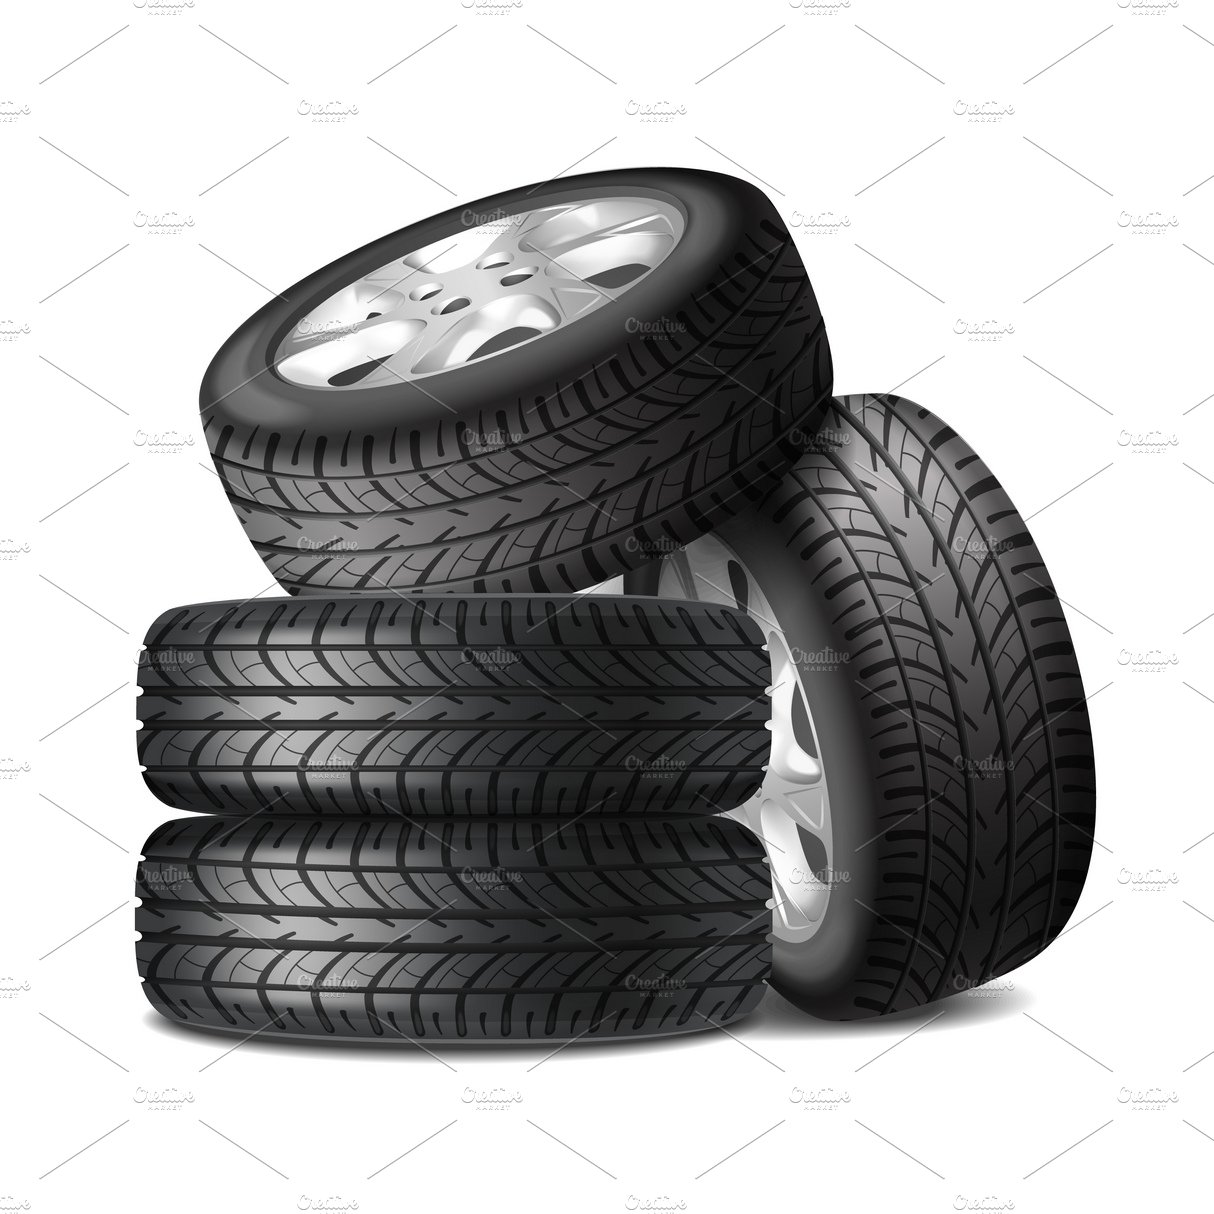 Car tires wheels realistic set cover image.